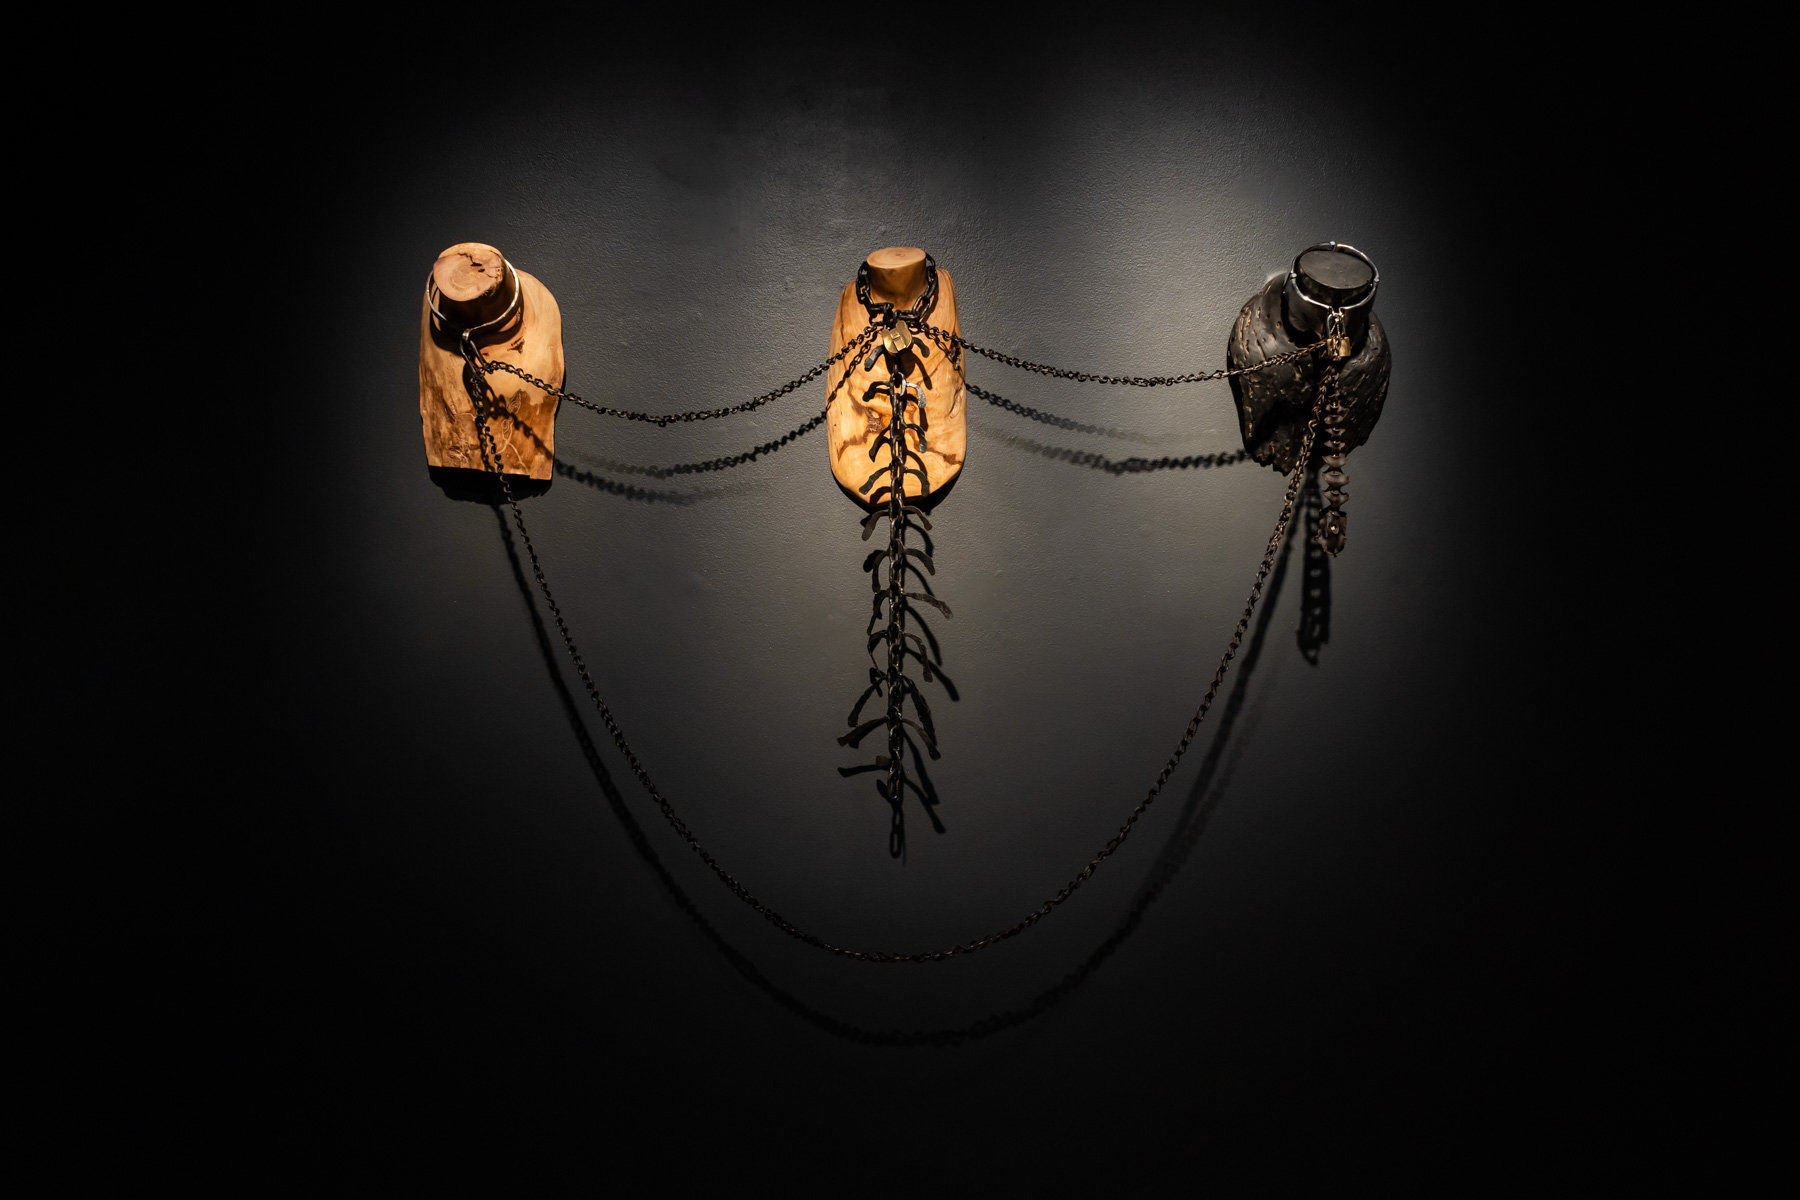 Three wooden busts, displaying neck and torso only, connected by a chain and mounted directly onto a black wall